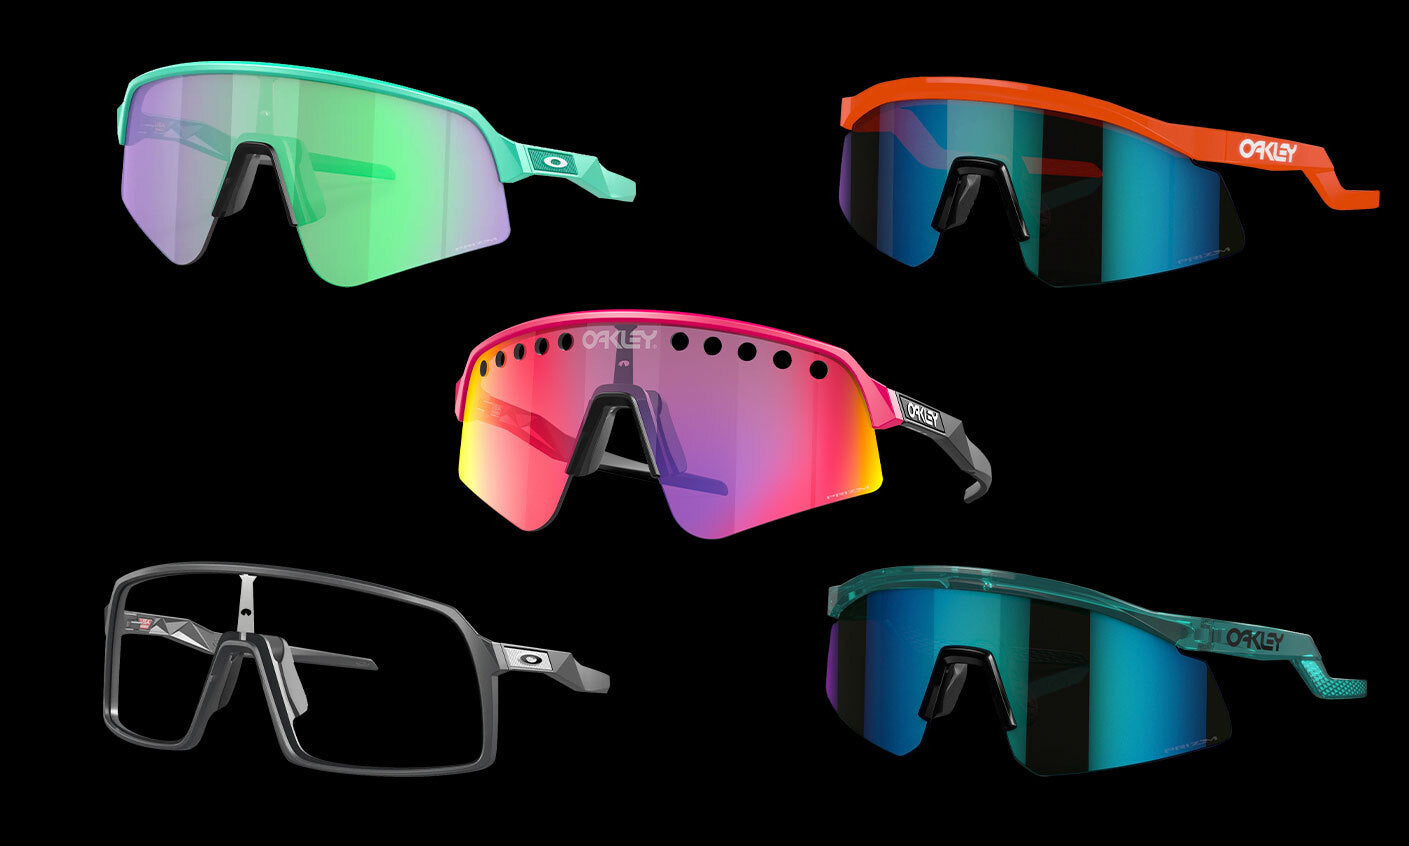 Cycling Sunglasses | Best Oakley, 100%, Smith, Tifosi & More Glasses ...